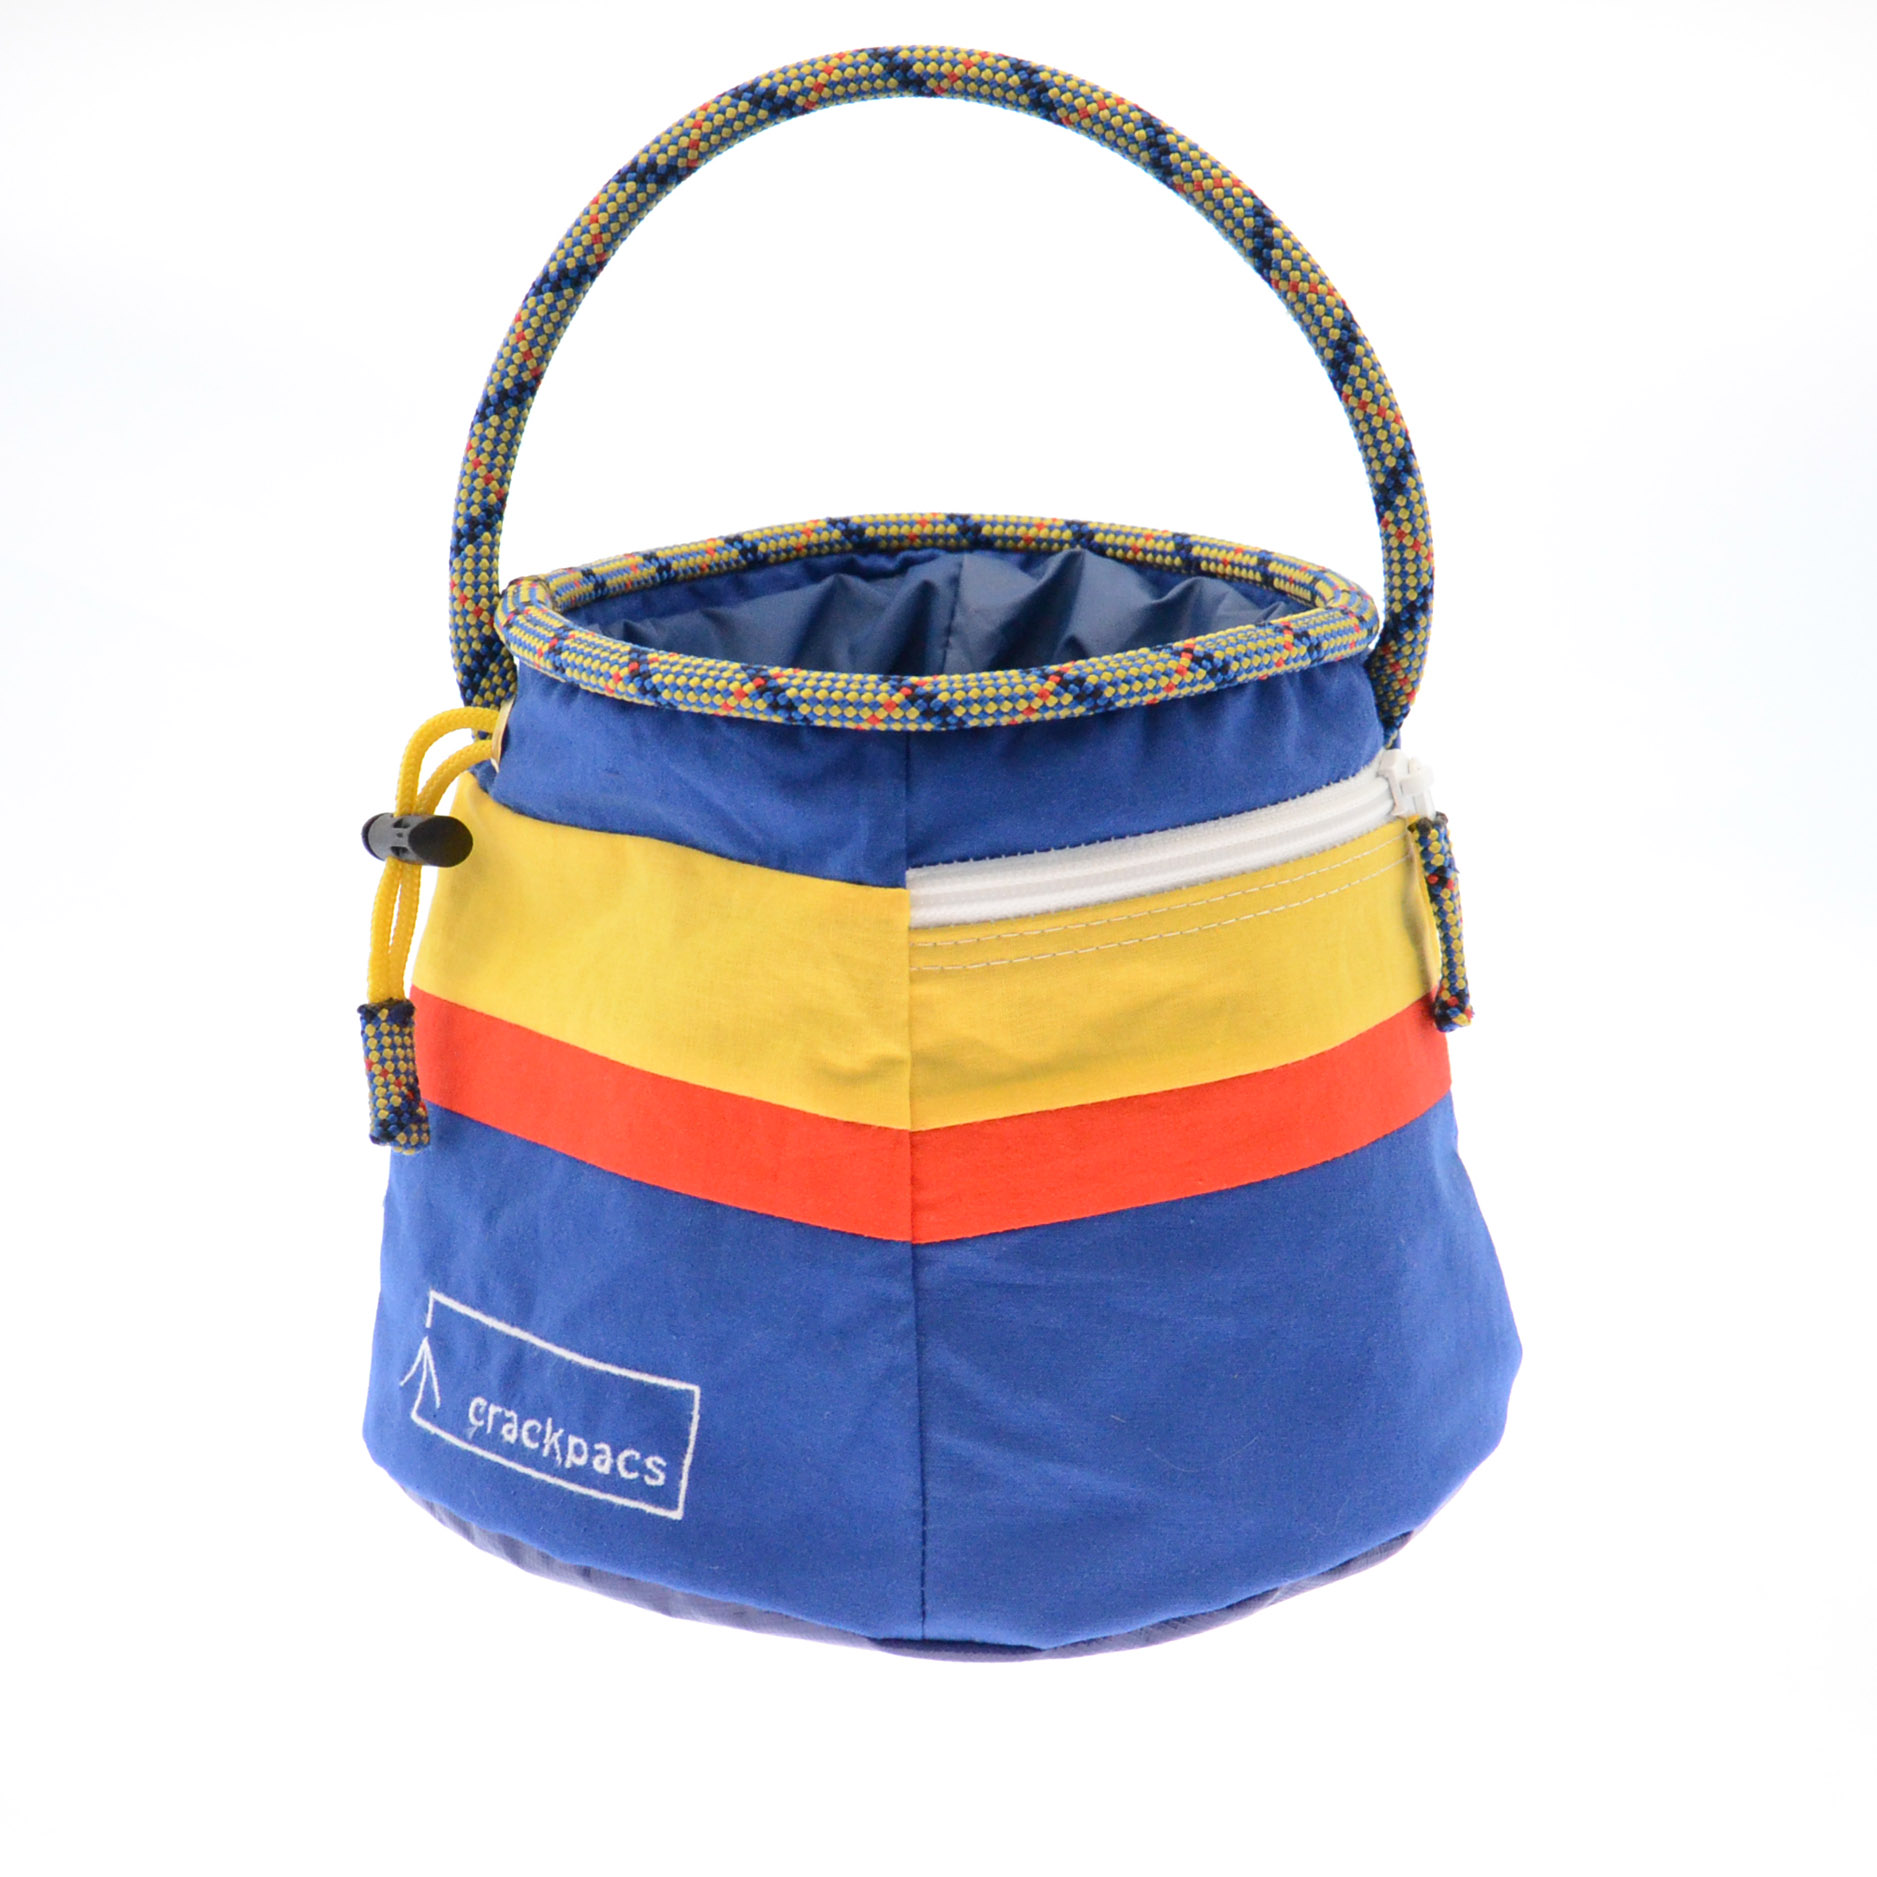 Upcycled boulder bucket chalk bag - one off creations by crackpacs